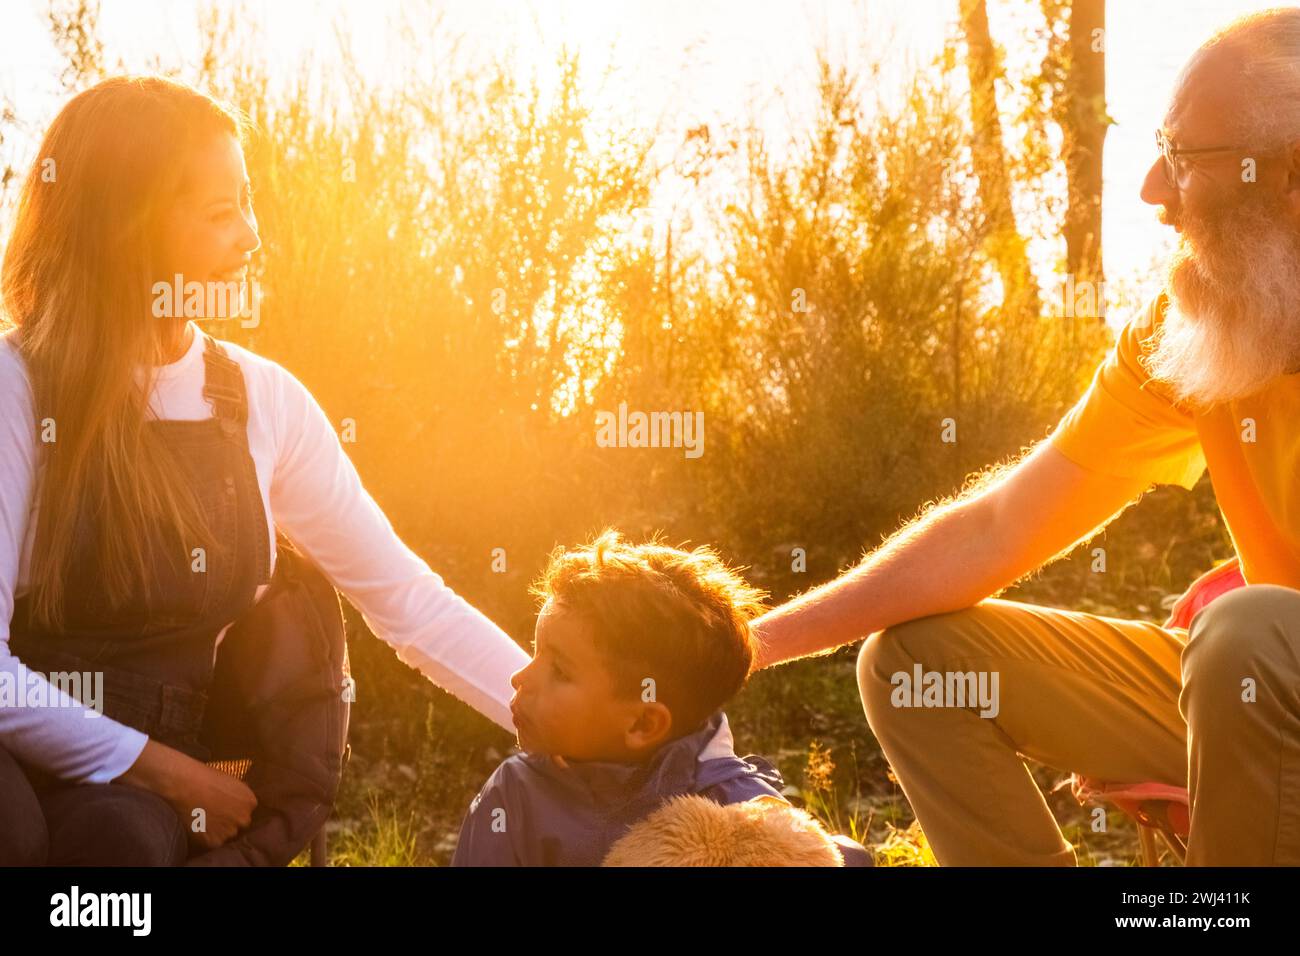 Generational Bonding: A Peaceful Family Moment in Nature Stock Photo